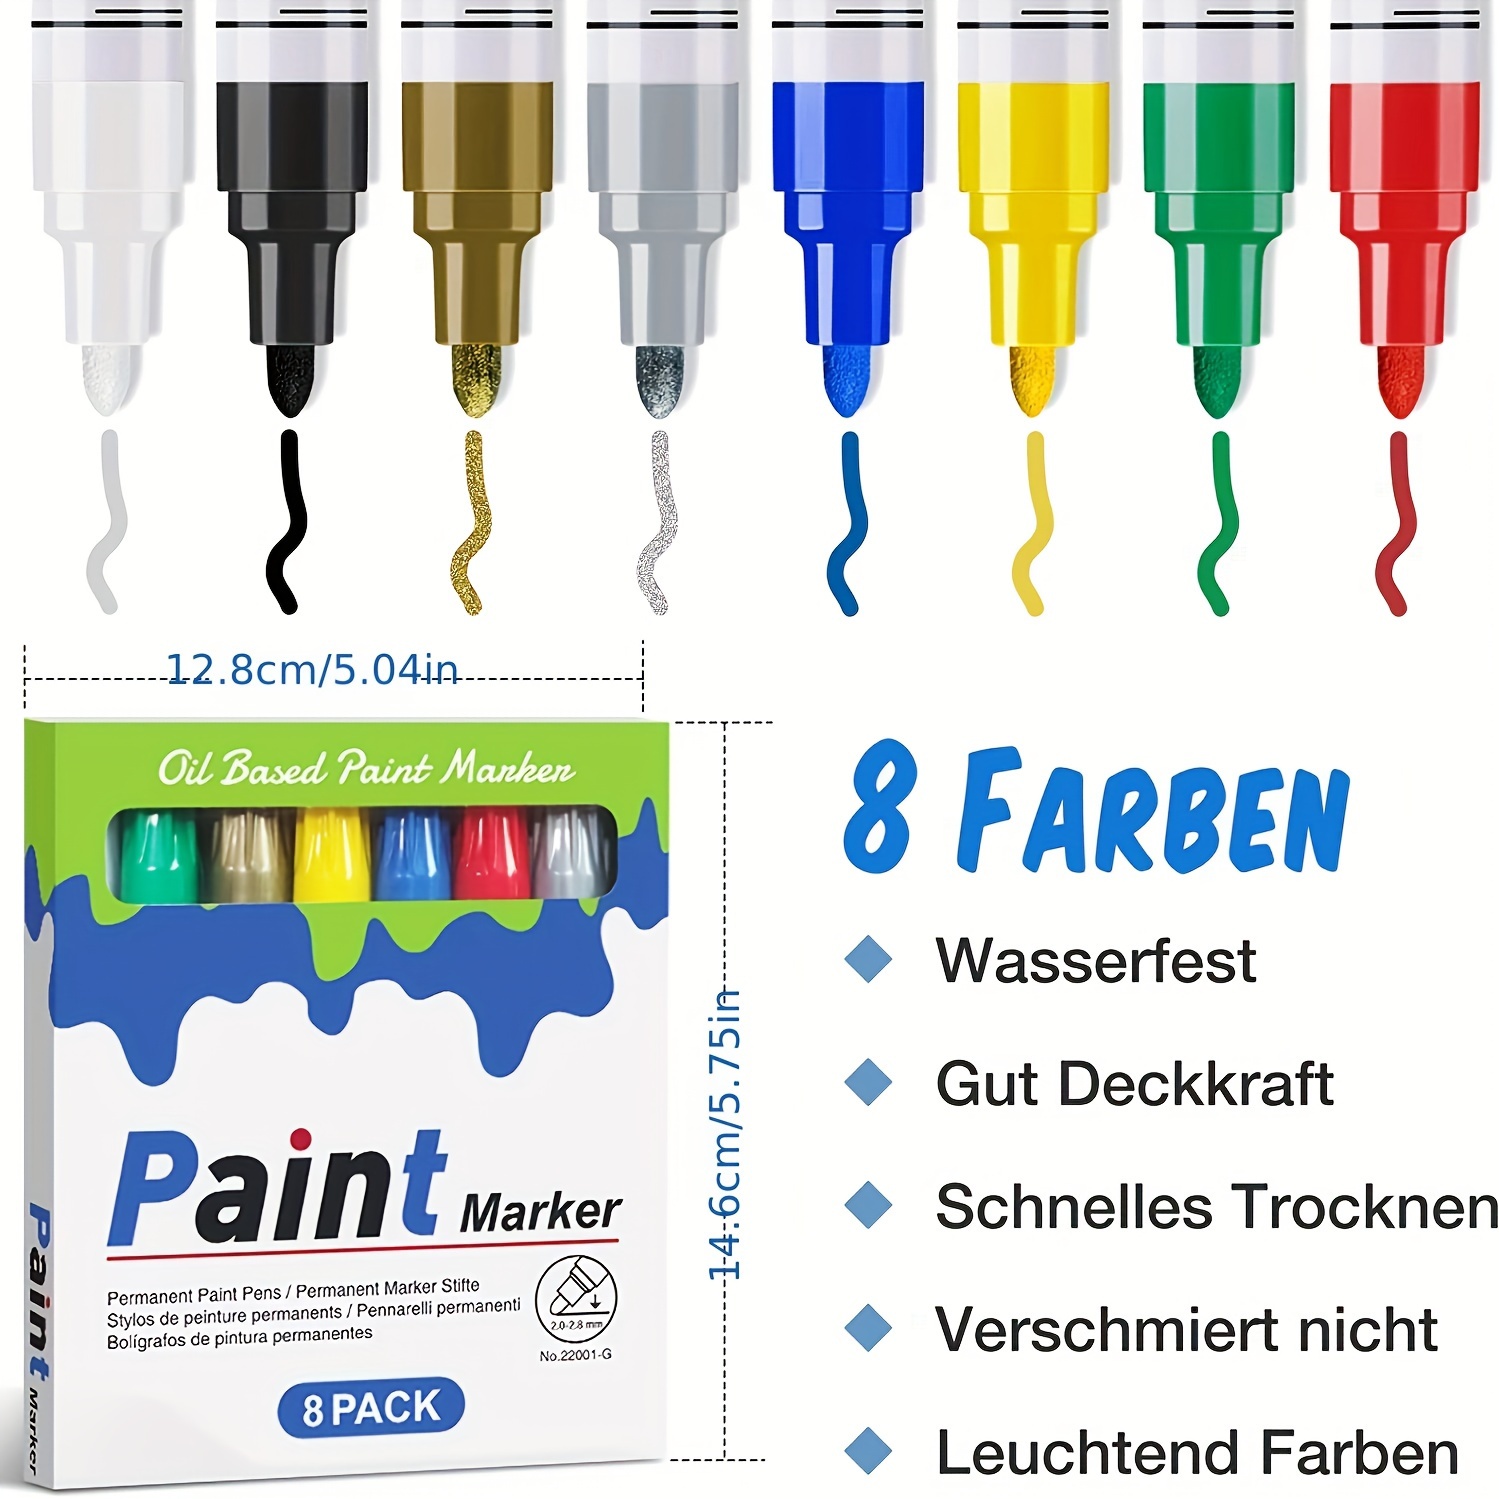 Paint Marker Pens - 36 Colors Permanent Oil Based Paint Markers, Medium  Tip, Quick Dry and Waterproof Assorted Color Marker for Metal, Wood,  Fabric